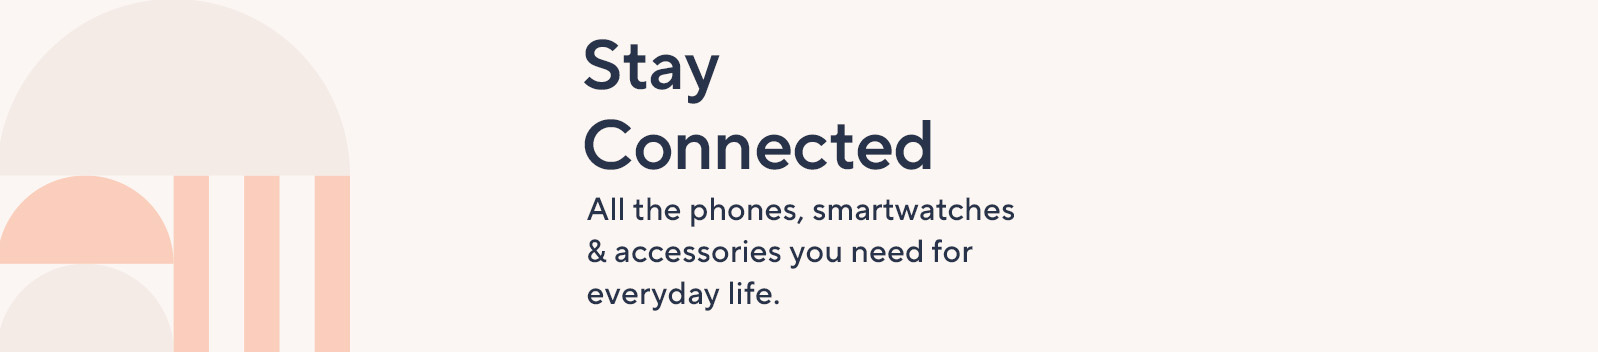 Stay connected: All the phones, smartwatches & accessories you need for everyday life.  